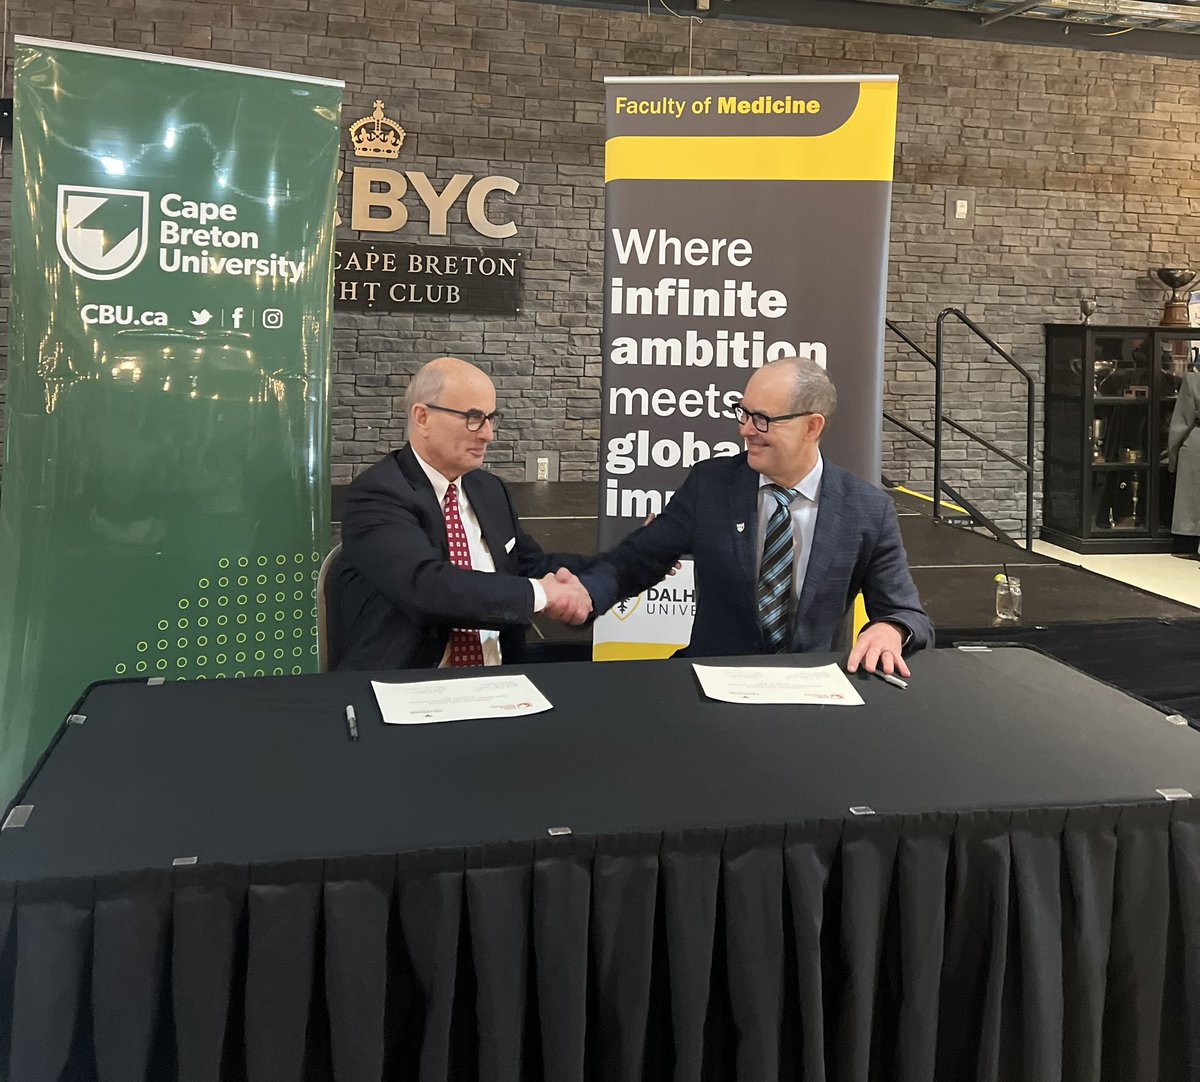 CBU and @DalhousieU are excited to be collaborating on the development of a joint medical campus for Cape Breton. This strategic partnership will ensure more Nova Scotians will have the opportunity to receive an excellent medical education in their home province.